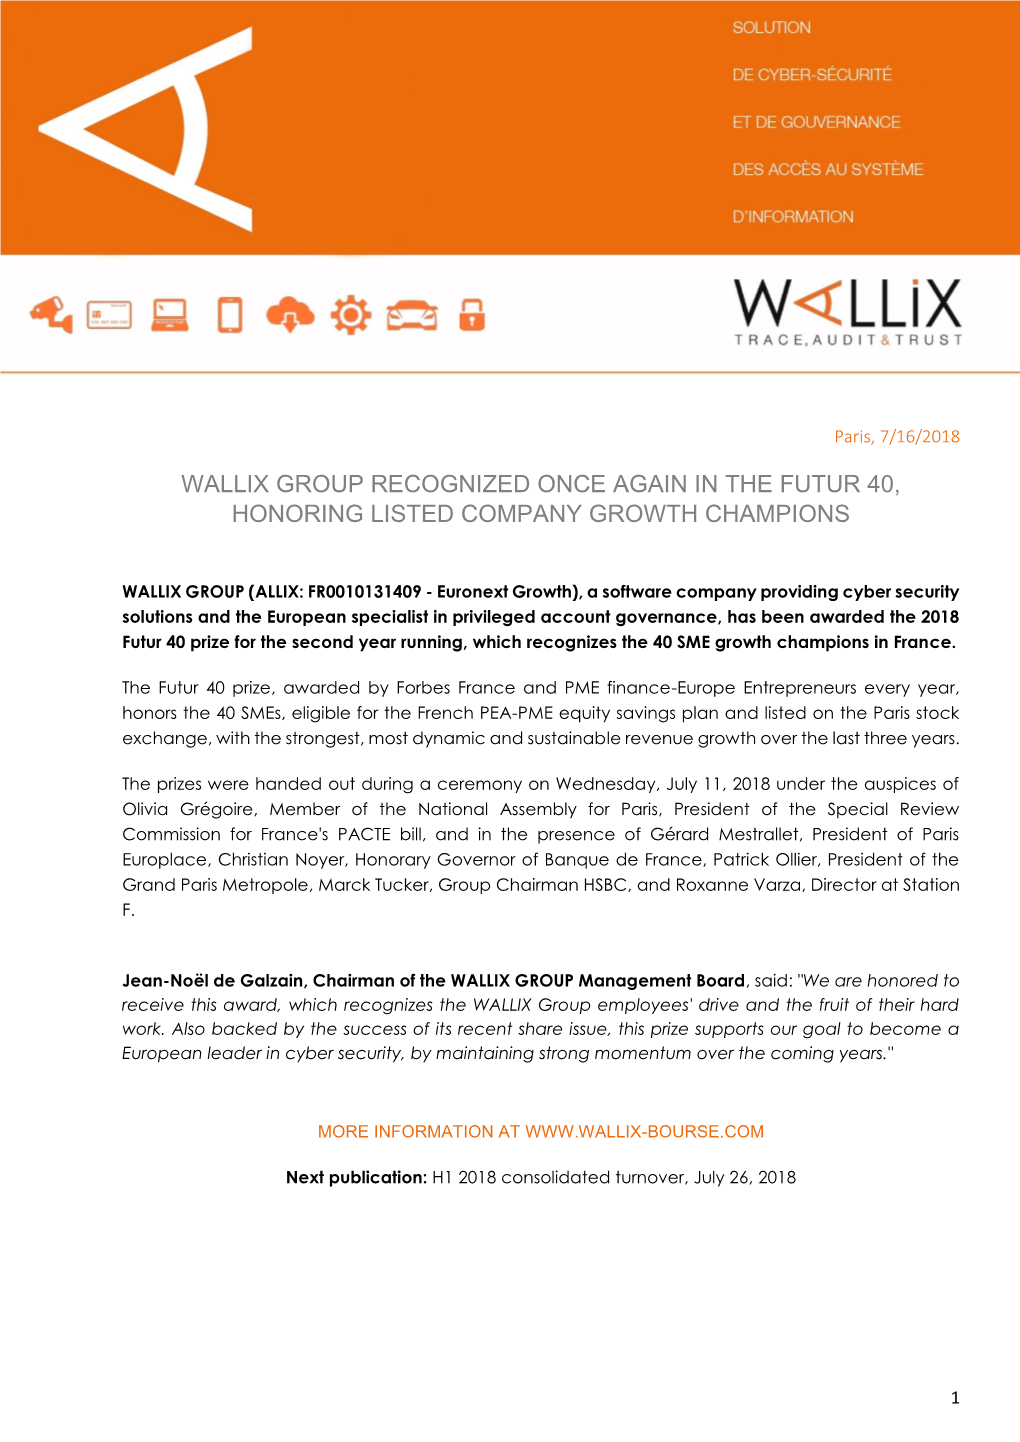 Wallix Group Recognized Once Again in the Futur 40, Honoring Listed Company Growth Champions